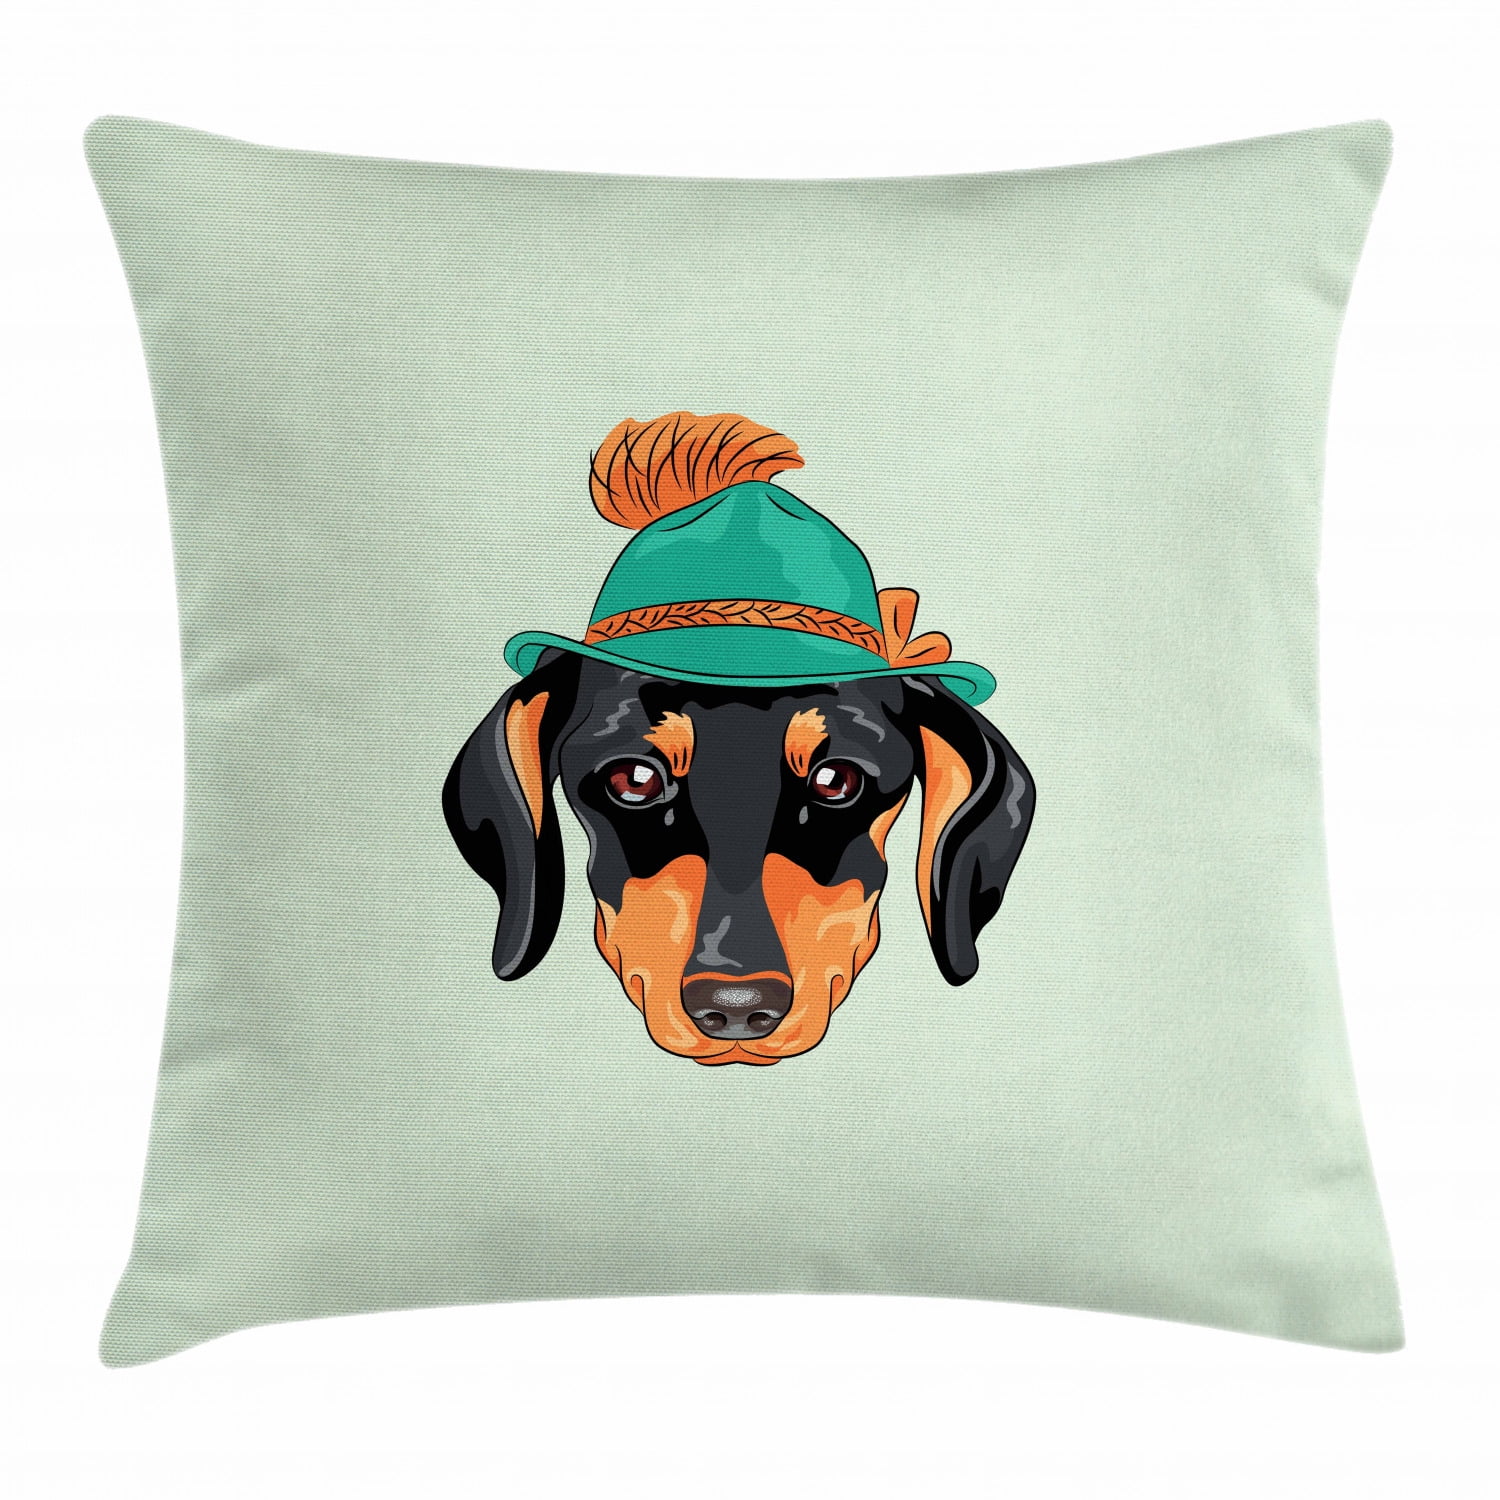 Multicolor Gifts for Poodle Lovers Retro Poodle Silhouette Throw Pillow 16x16